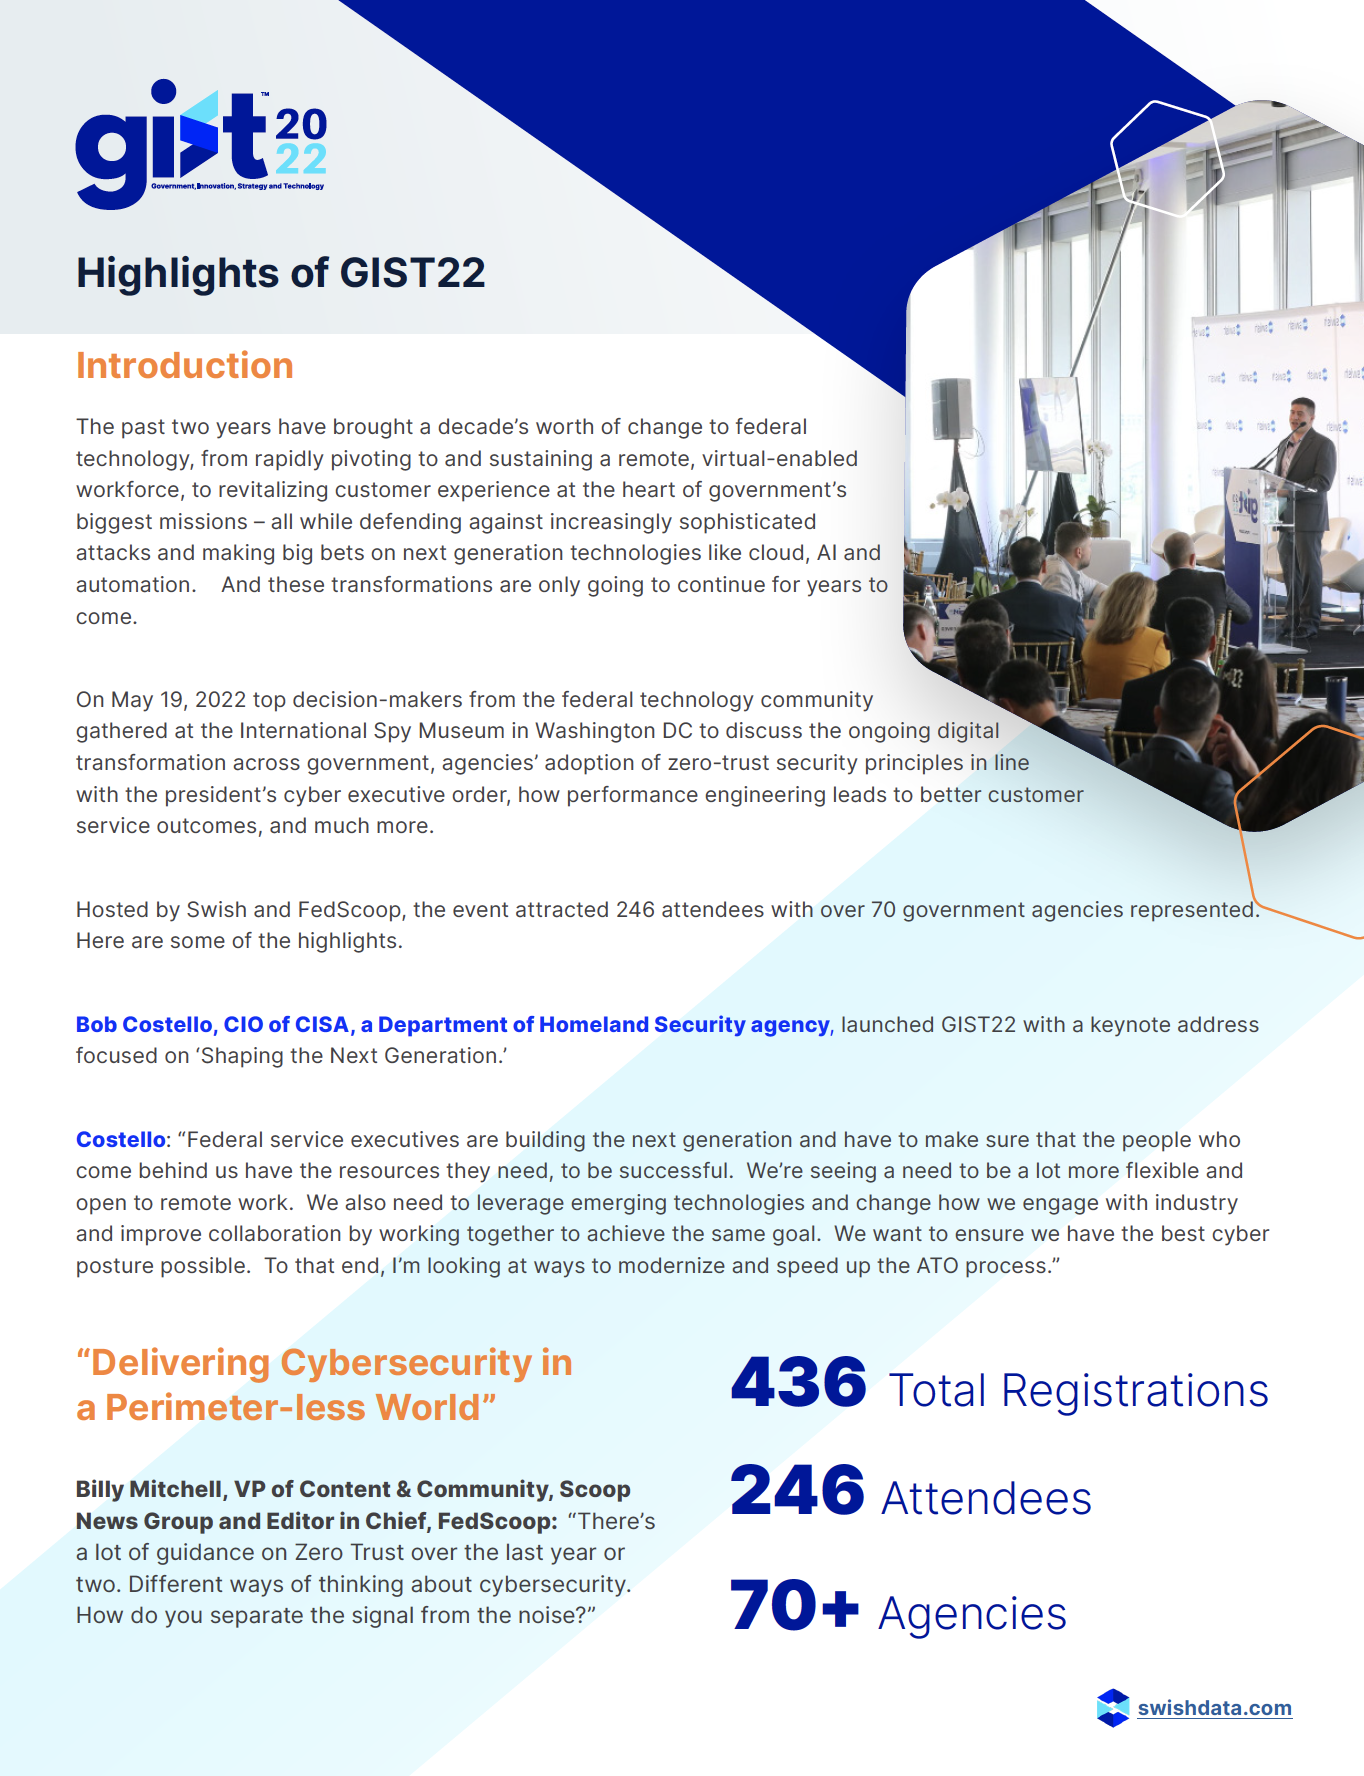 Highlights of GIST22